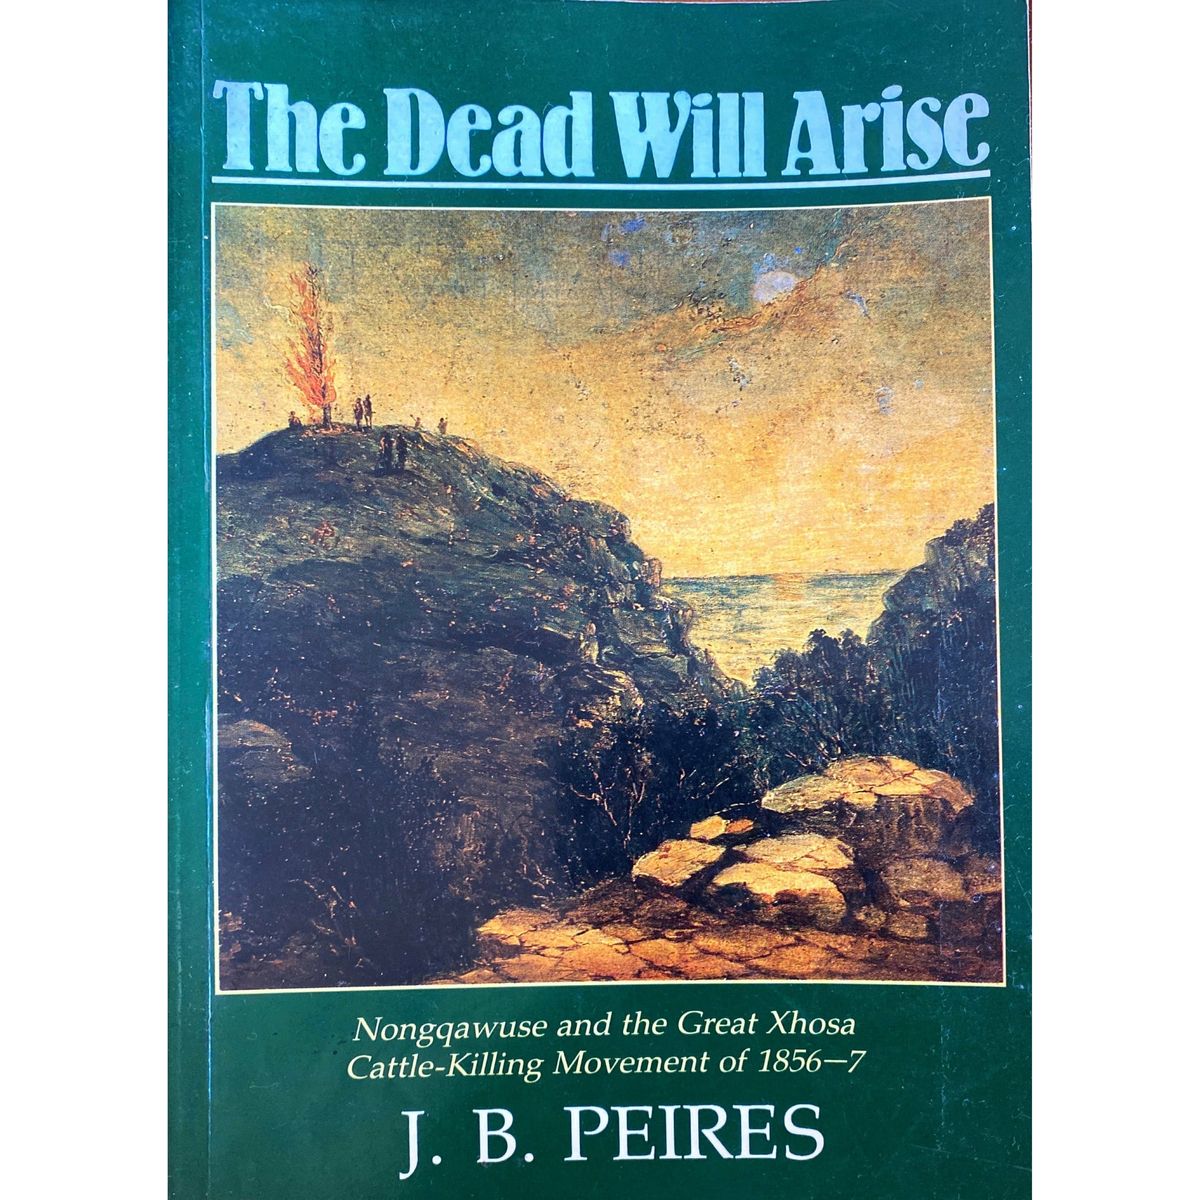 ISBN: 9780869753811 / 0869753819 - The Dead Will Arise: Nongqawuse and the Great Xhosa Cattle-Killing Movement of 1856-7 by J.B. Peires [1989]